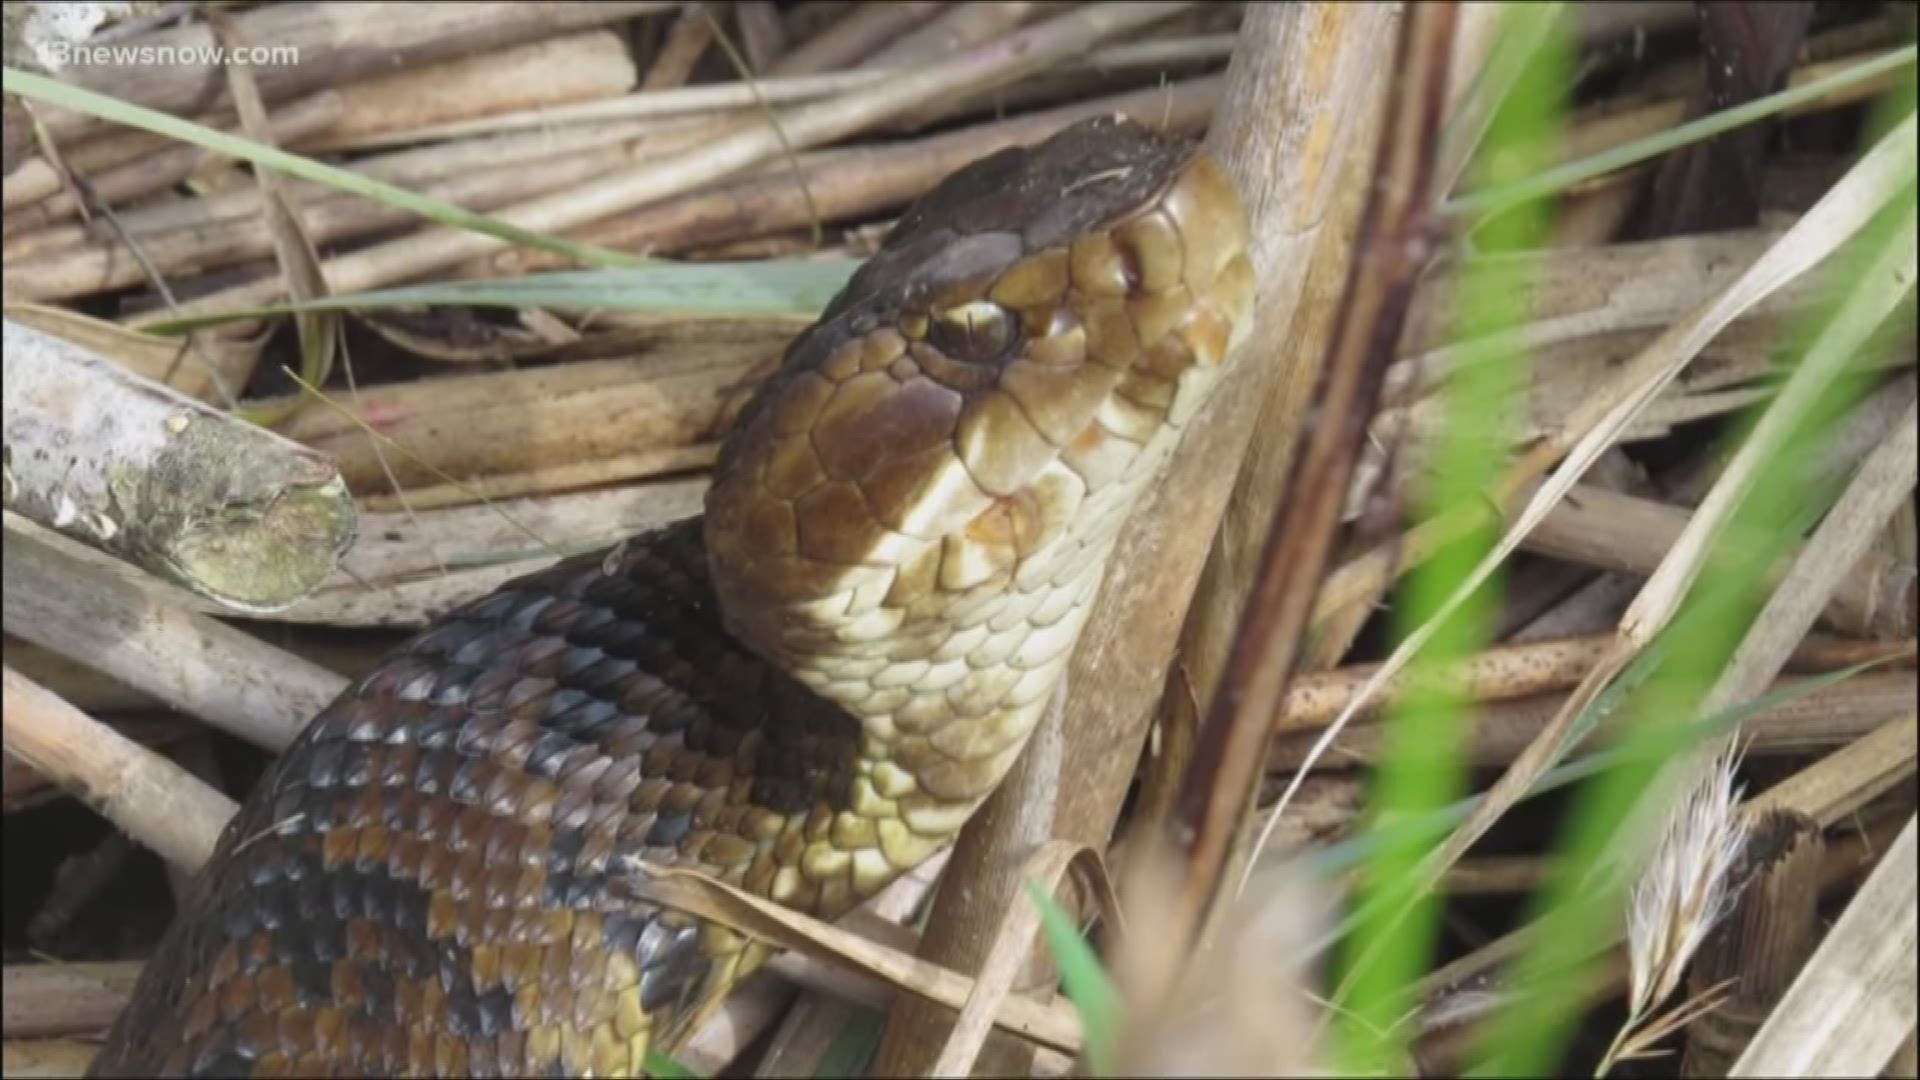 Experts warn residents not to try and remove snakes on their own because it's easy to confuse snake breeds and there are some venomous ones in the area.